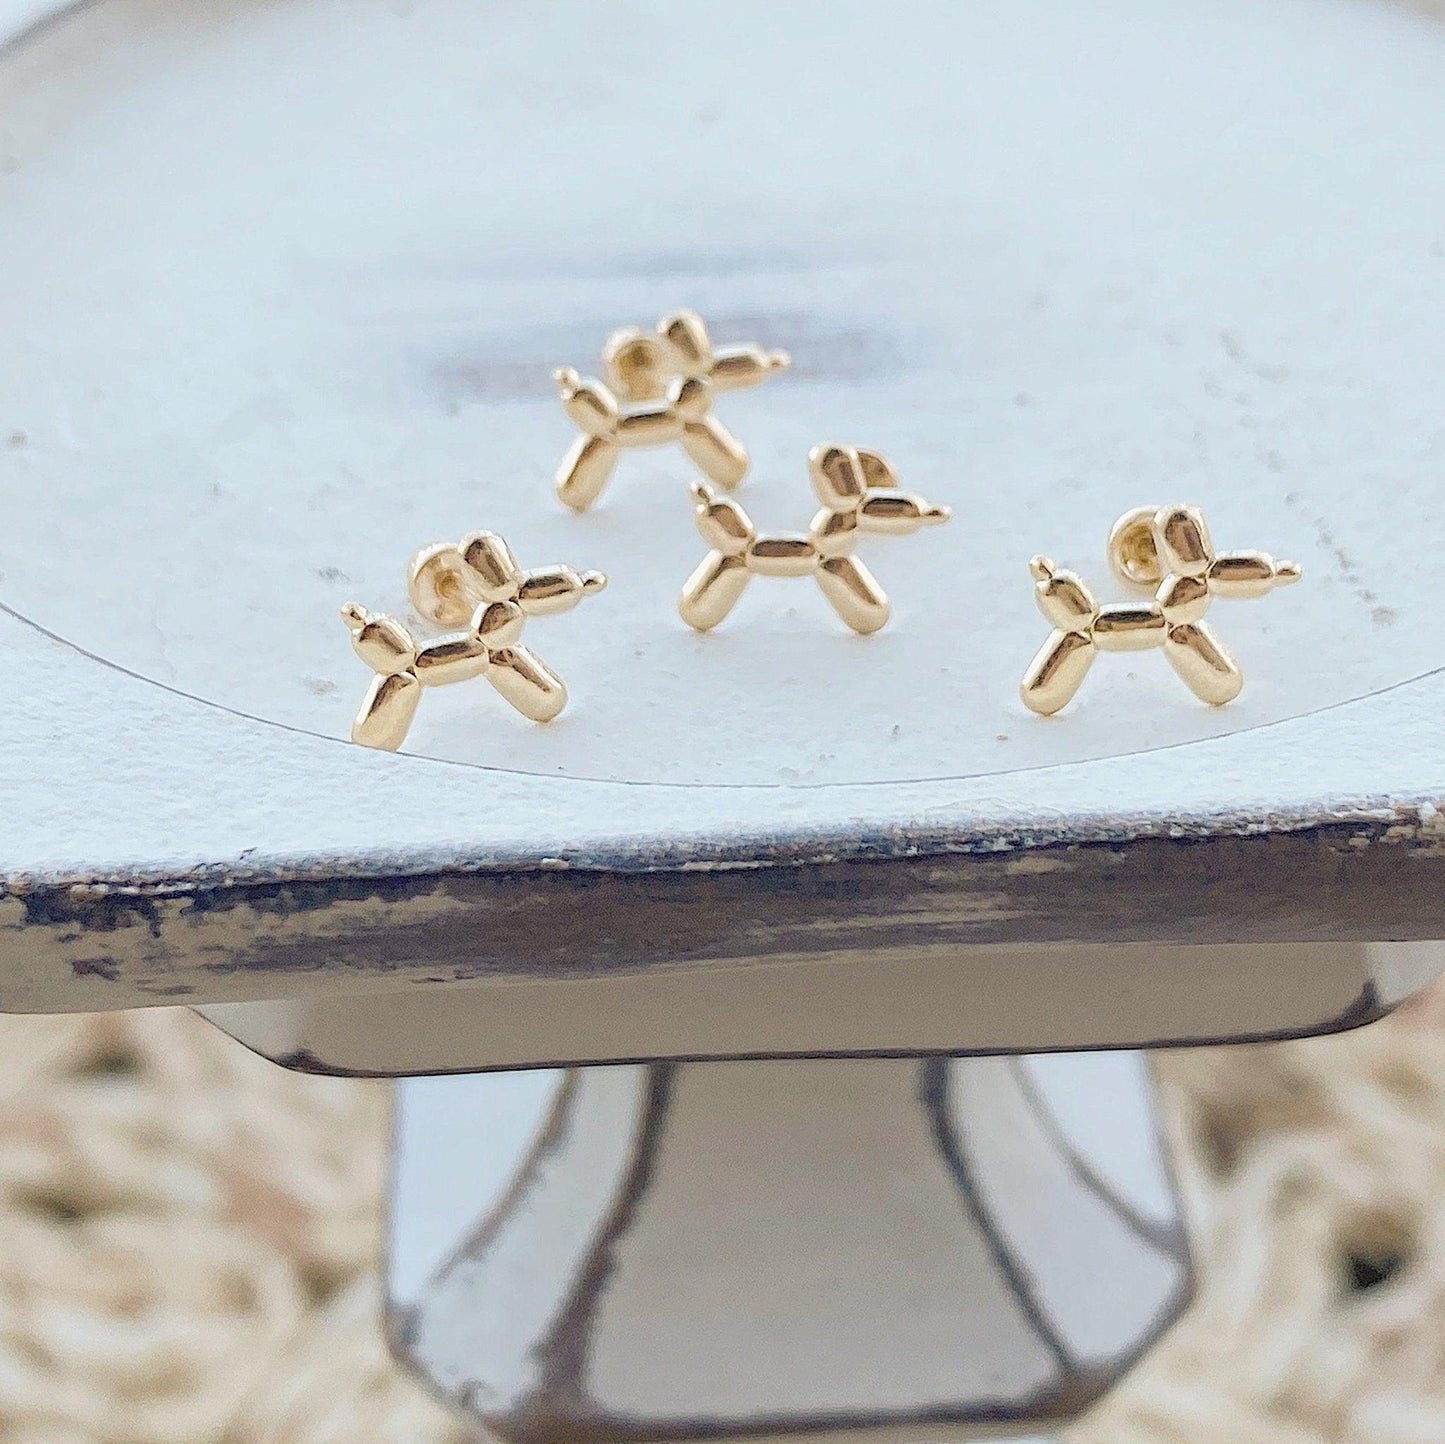 Load image into Gallery viewer, These gold dog earrings are perfect for anyone who loves dogs! They can be worn with jeans, or formal attire. The earrings arrive in a little glass bottle to make them a great gift for any occasion.
